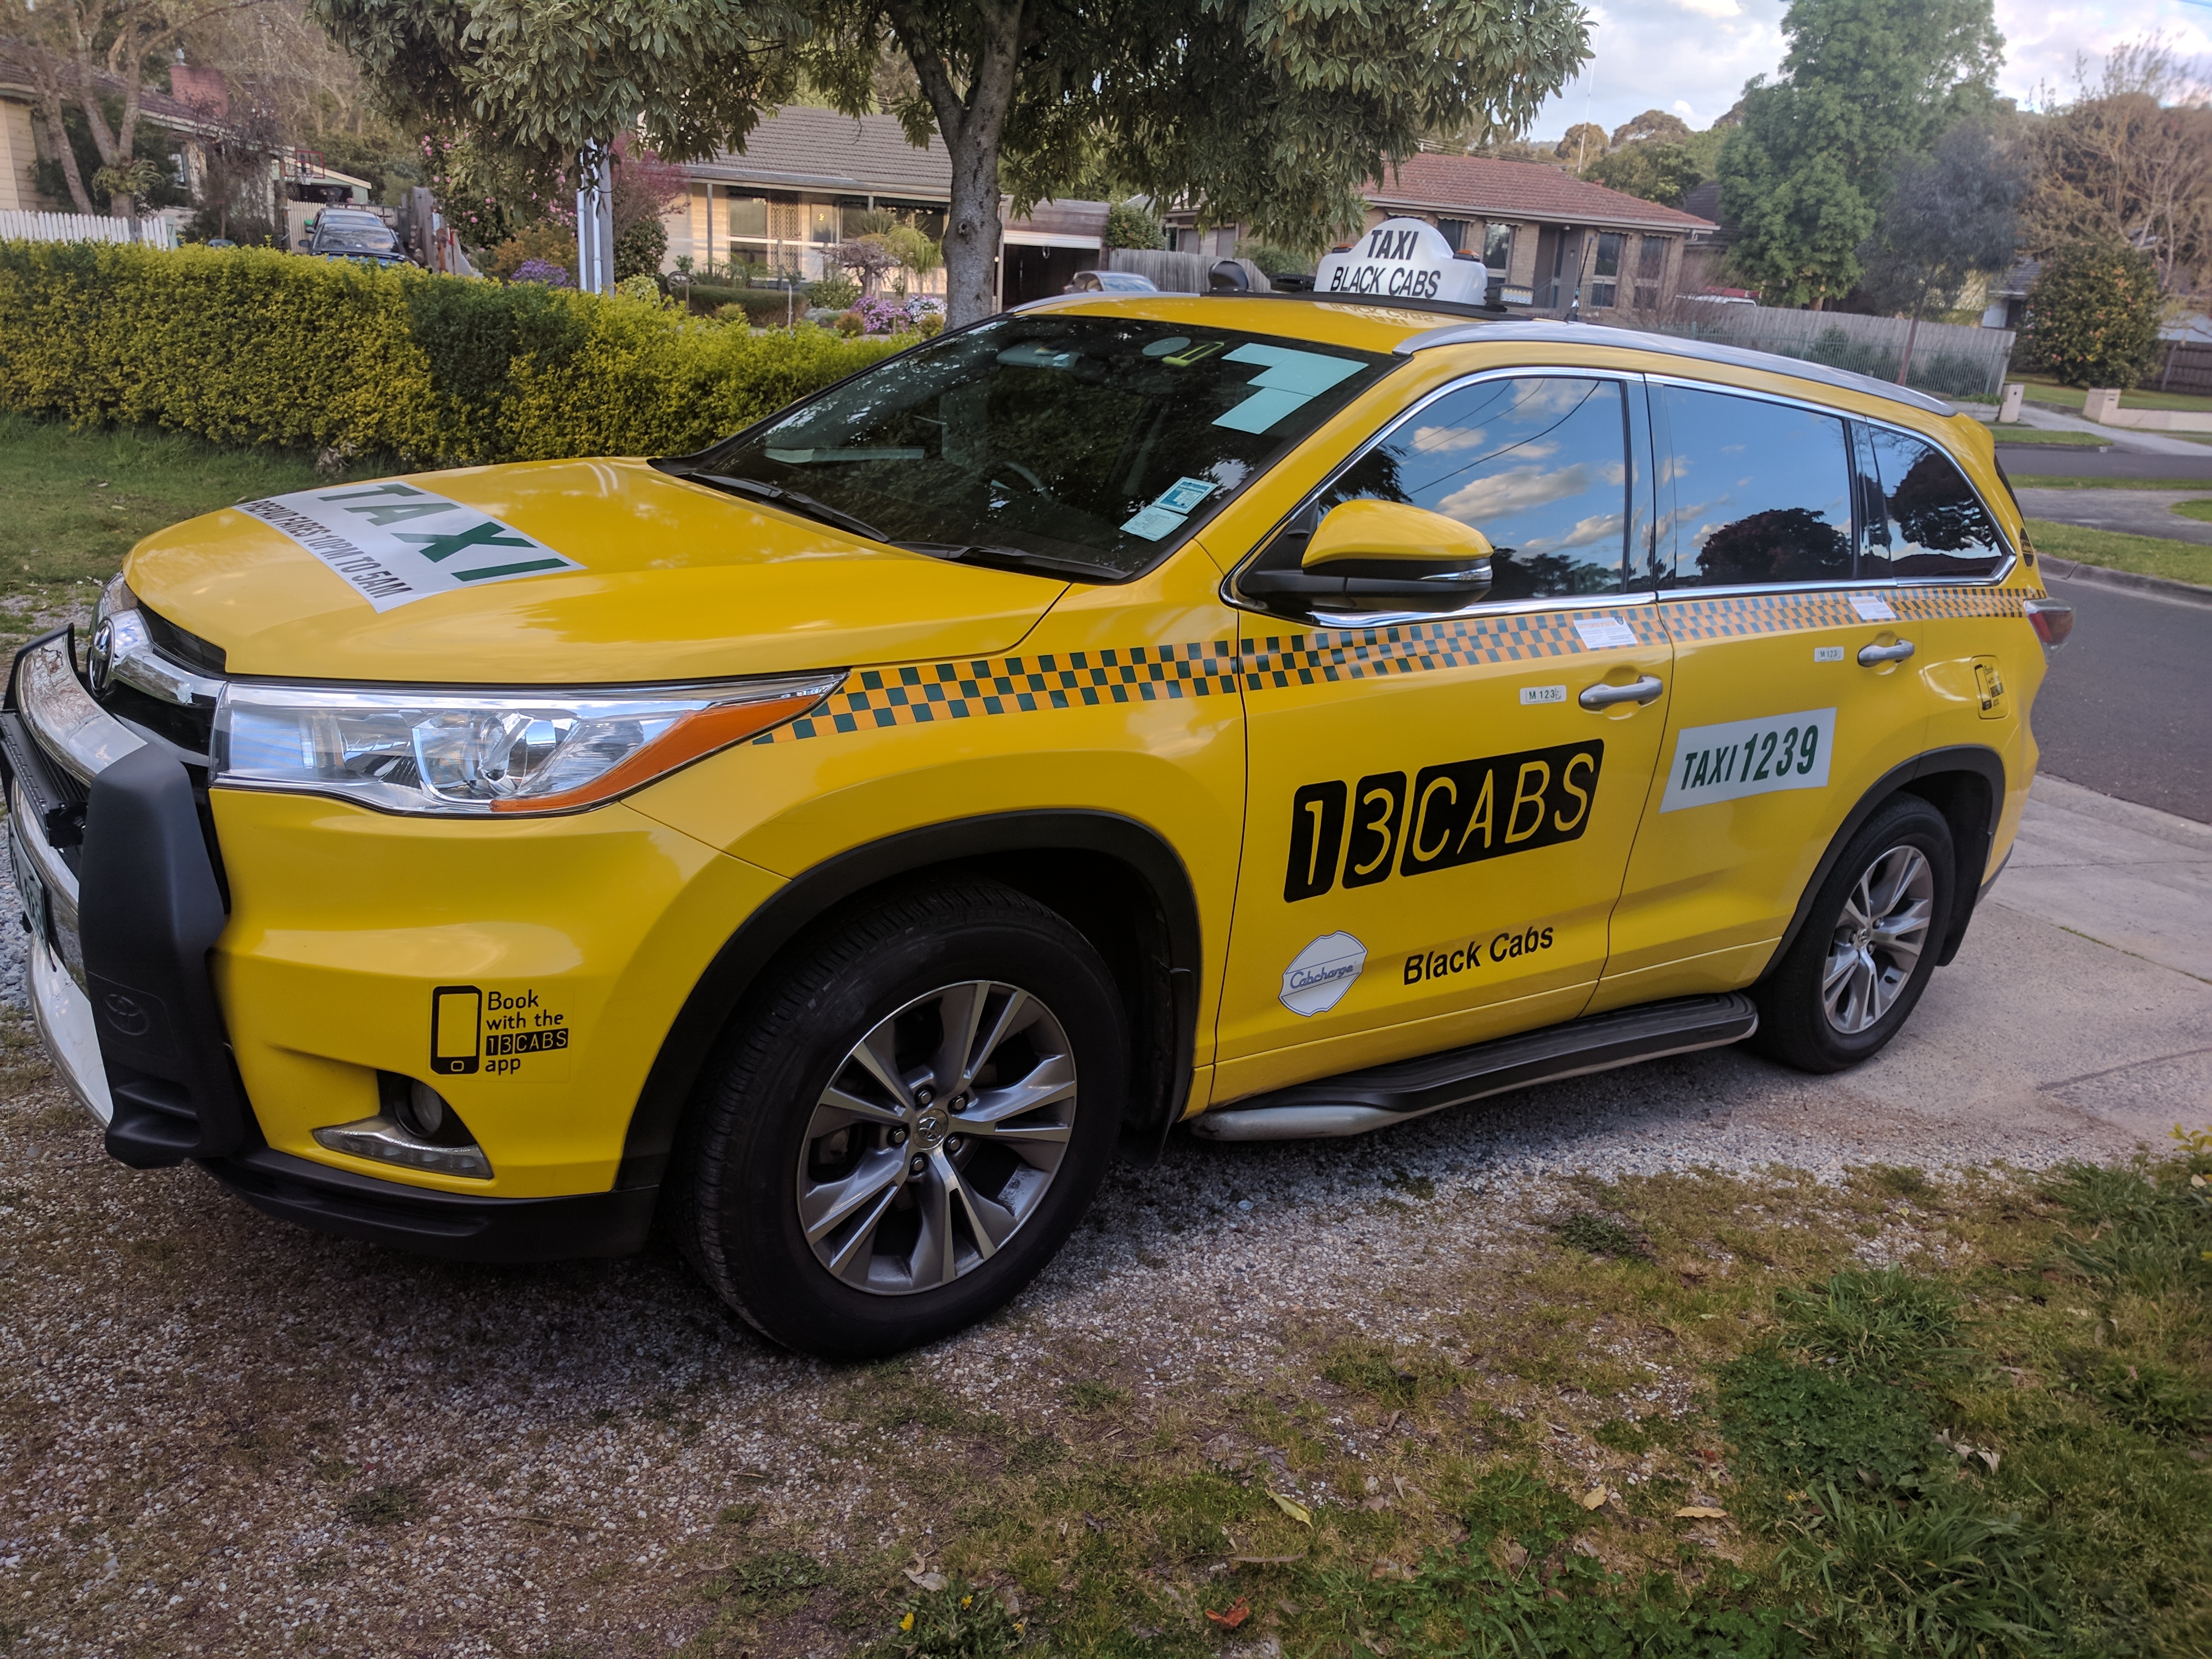 Melbourne Eastern Taxis provide both quality Sudan & Wagon cabs, suitable for all types of transport to and from local clubs, pubs & venues in Melbourne's East.